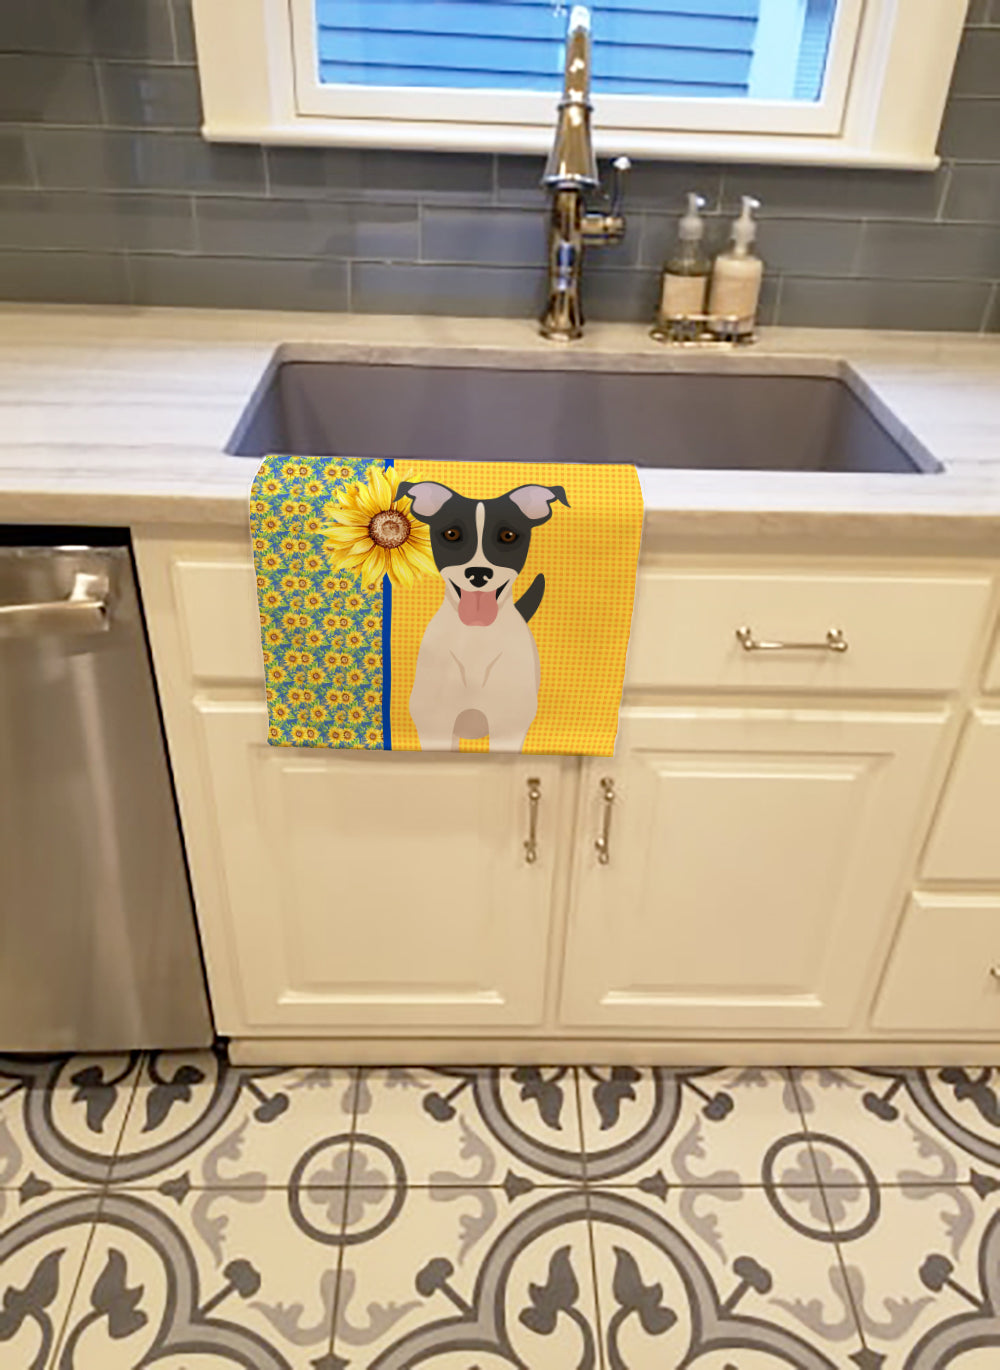 Buy this Summer Sunflowers Black White Smooth Jack Russell Terrier Kitchen Towel